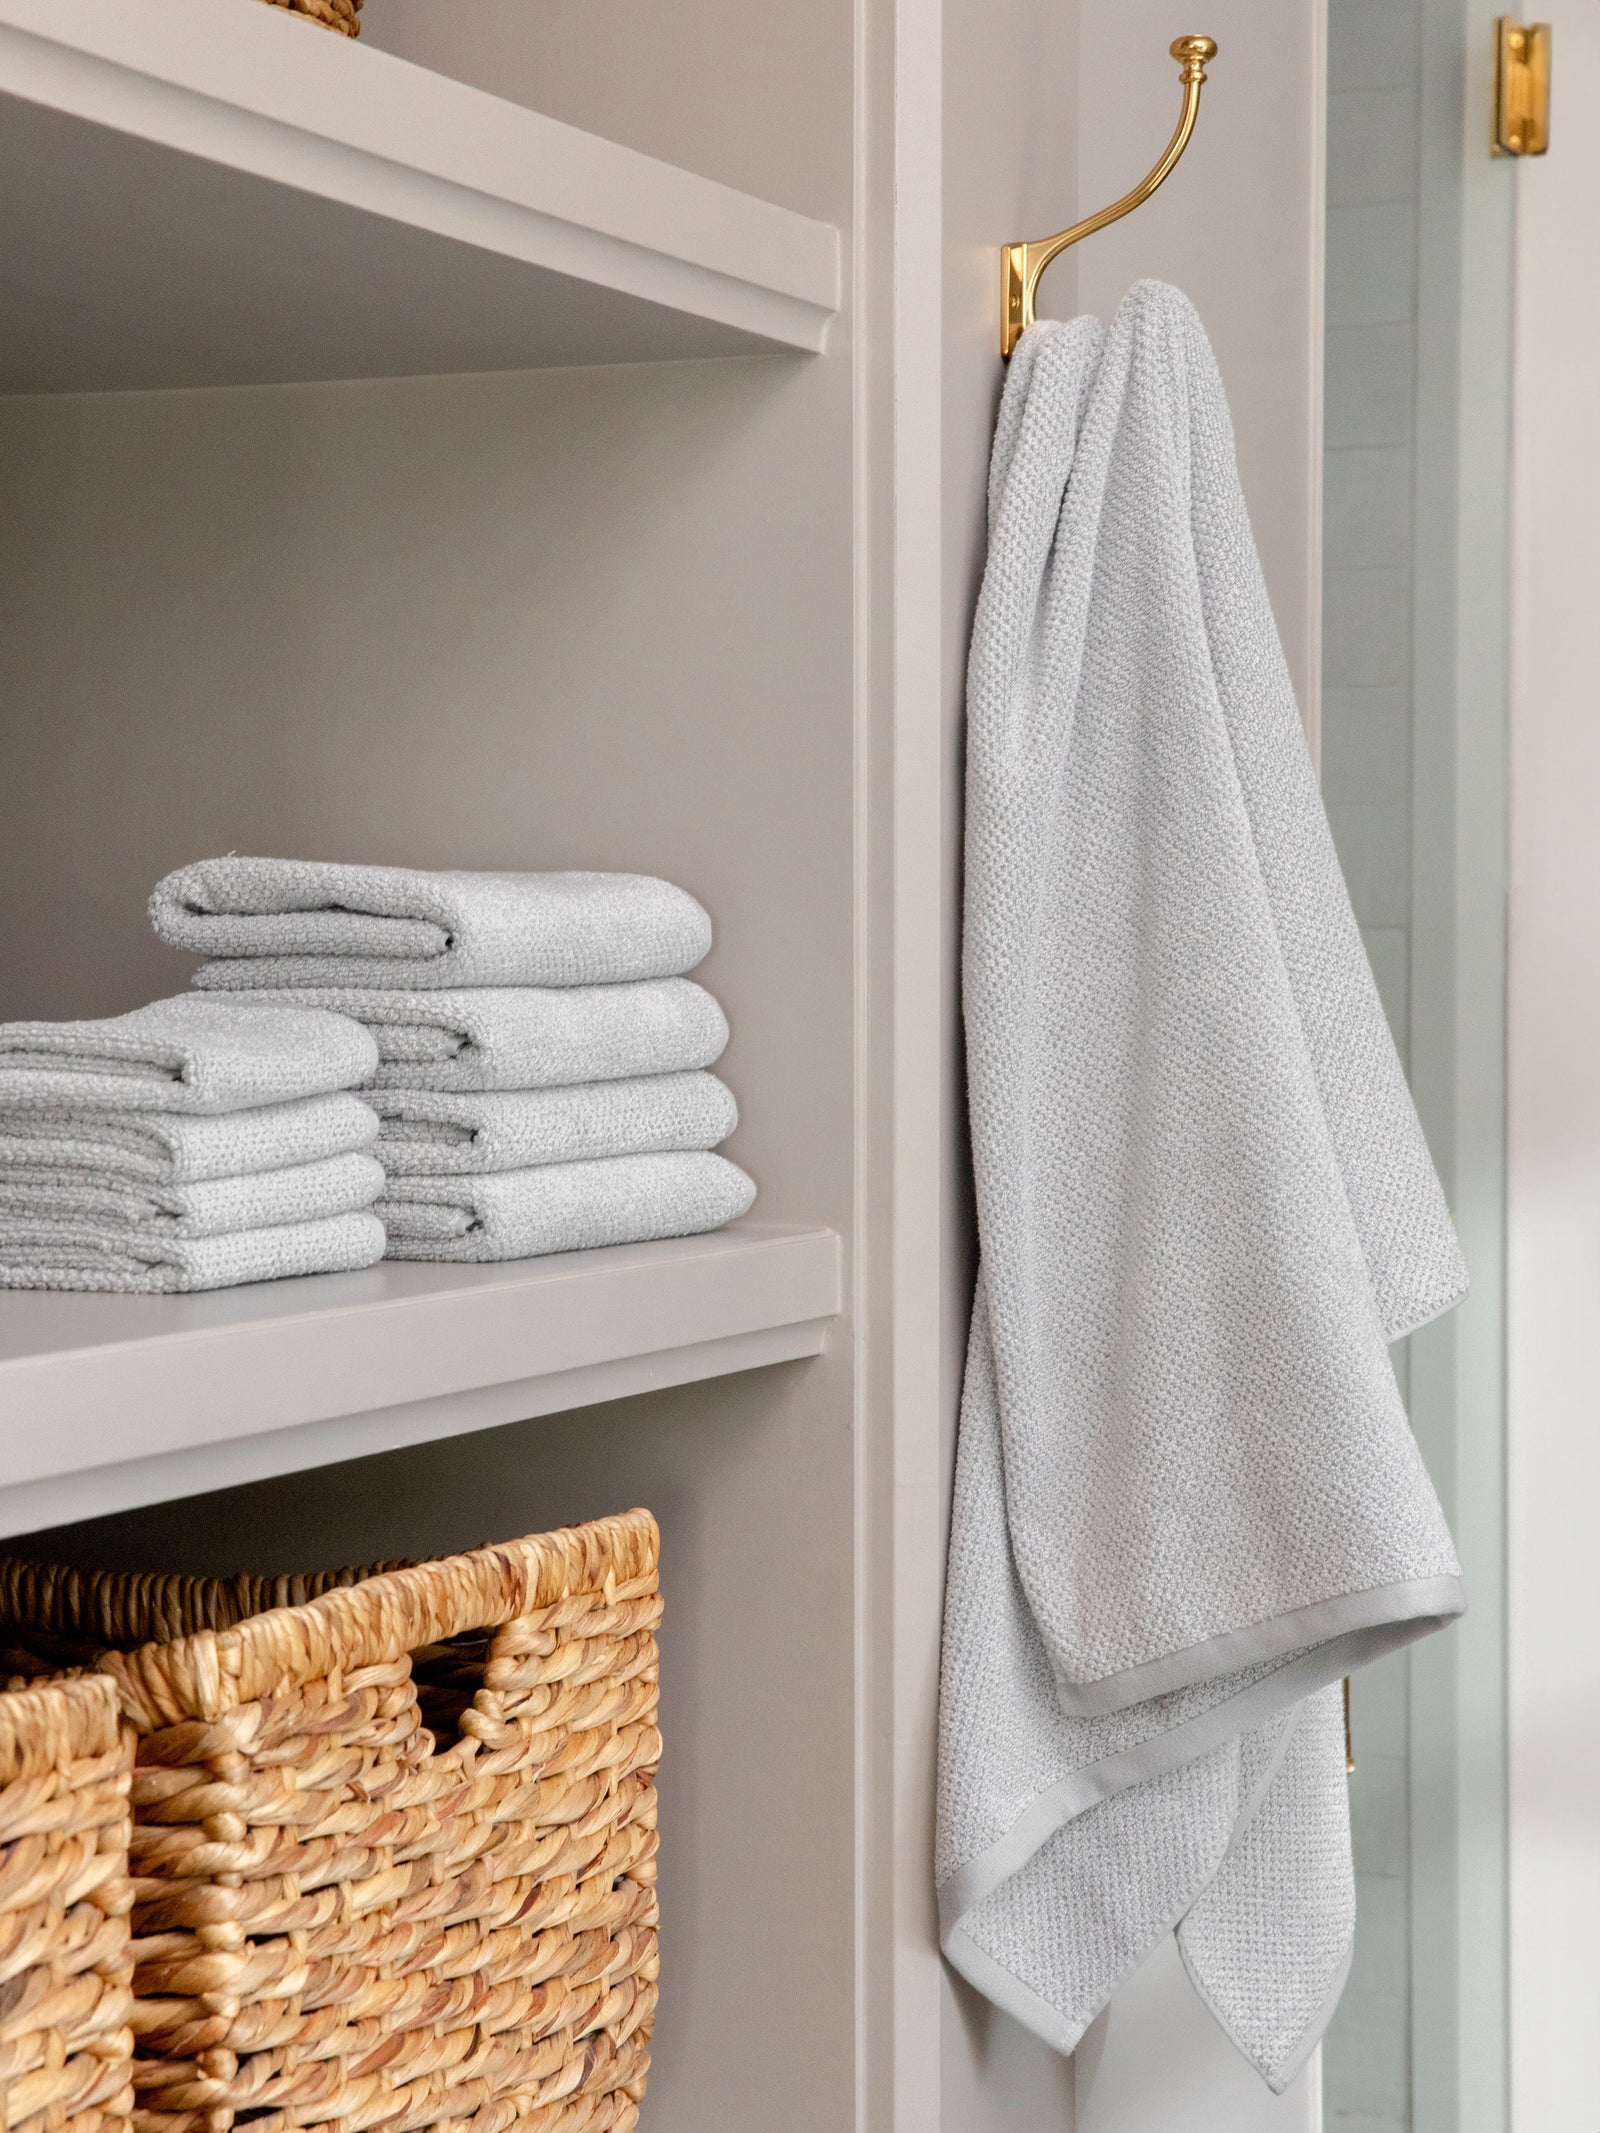 Complete Nantucket Bath Bundle in the color Heathered Harbor Mist. Photo of Complete Nantucket Bath Bundle taken as the hand towels, wash clothes, and bath towels are neatly placed on shelves in a bathroom. 